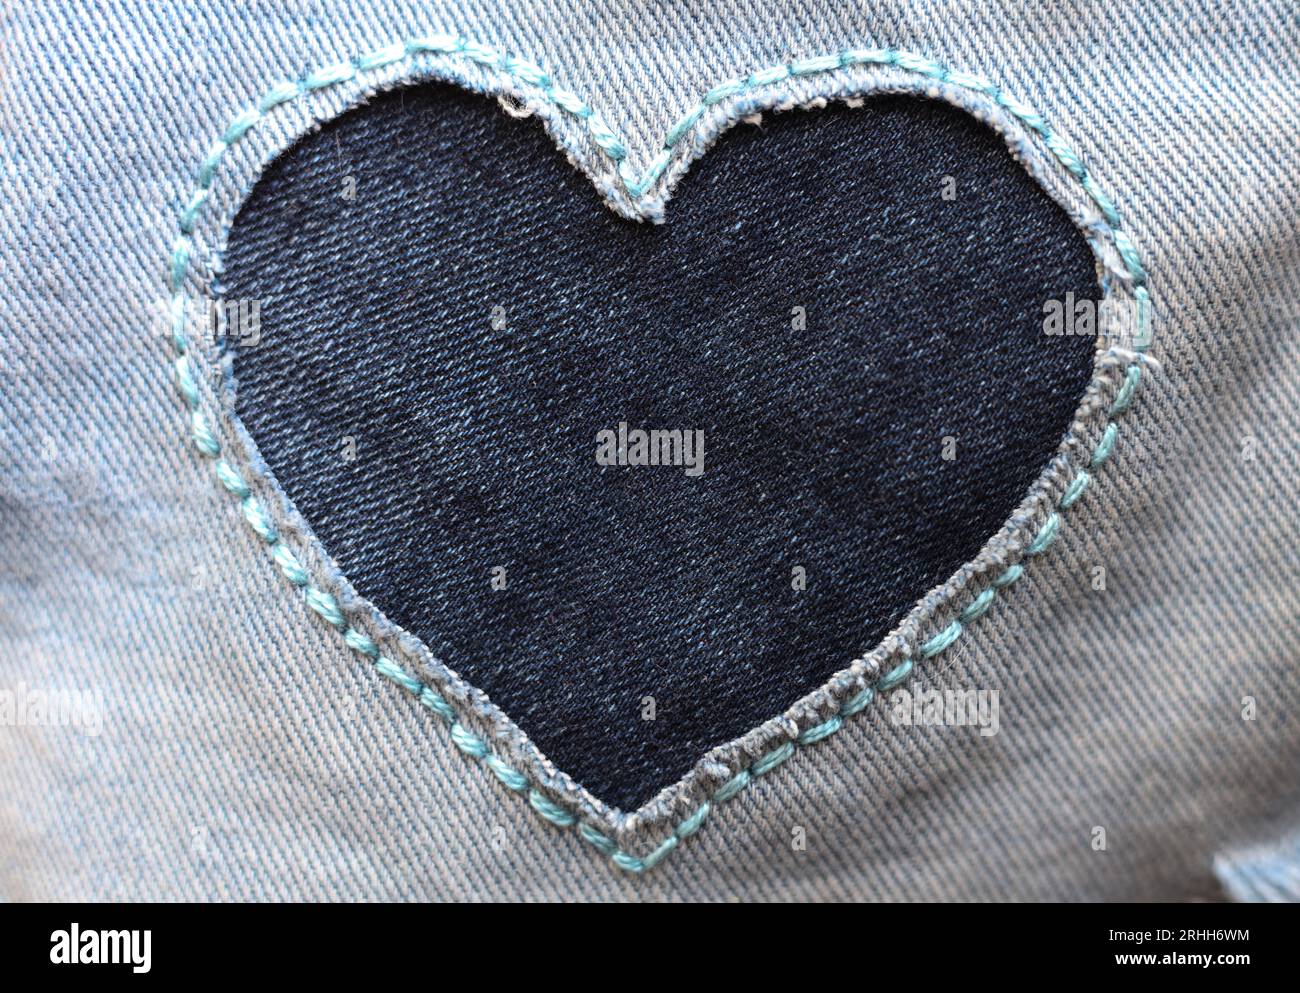 heart shaped patch on jeans fabric Stock Photo